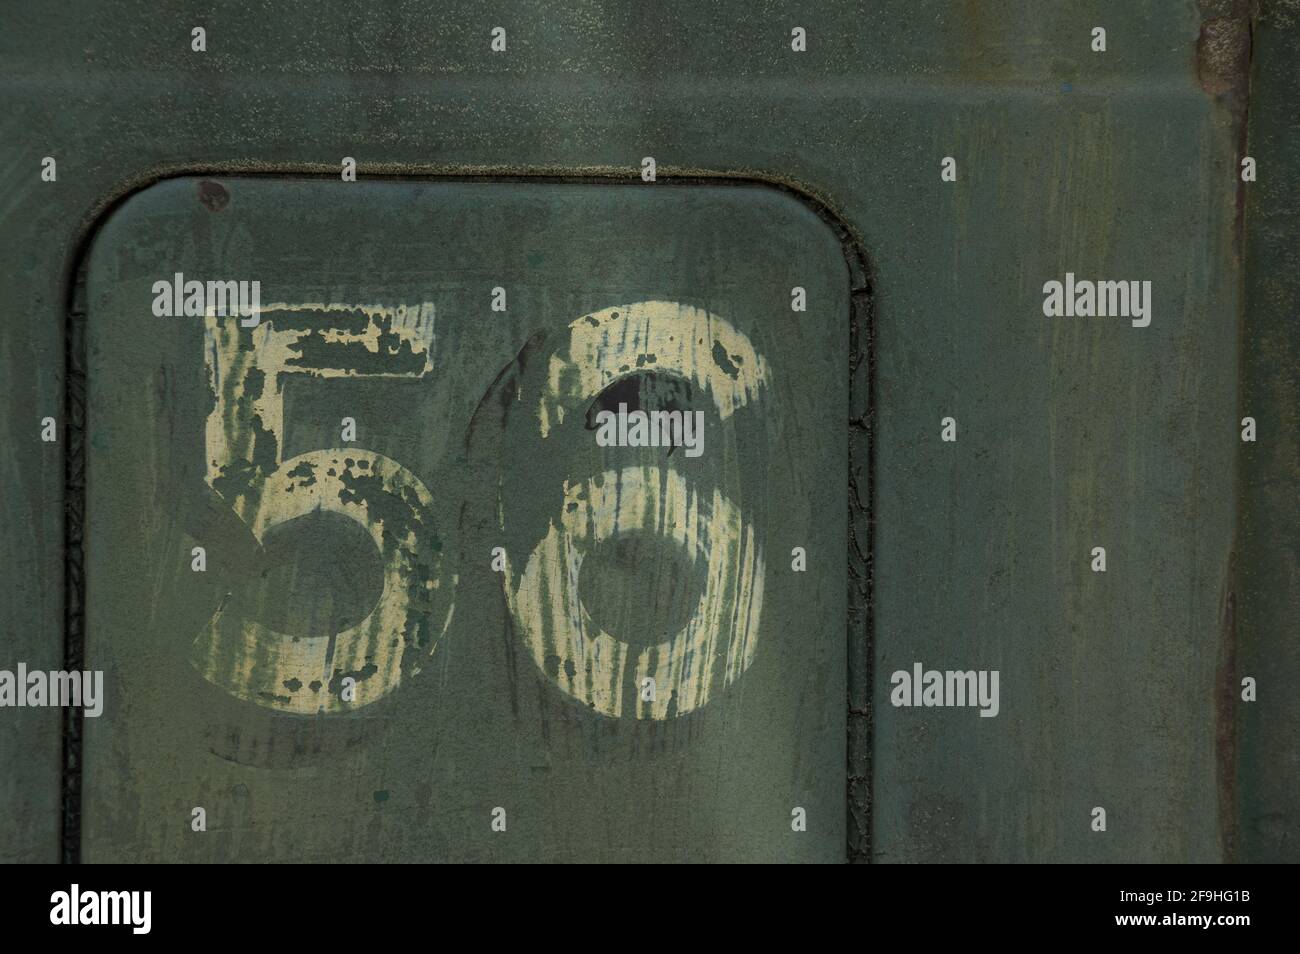 Number 56 painted on side of old rusted truck - number is white/cream colored, background is blue-green-grey Stock Photo